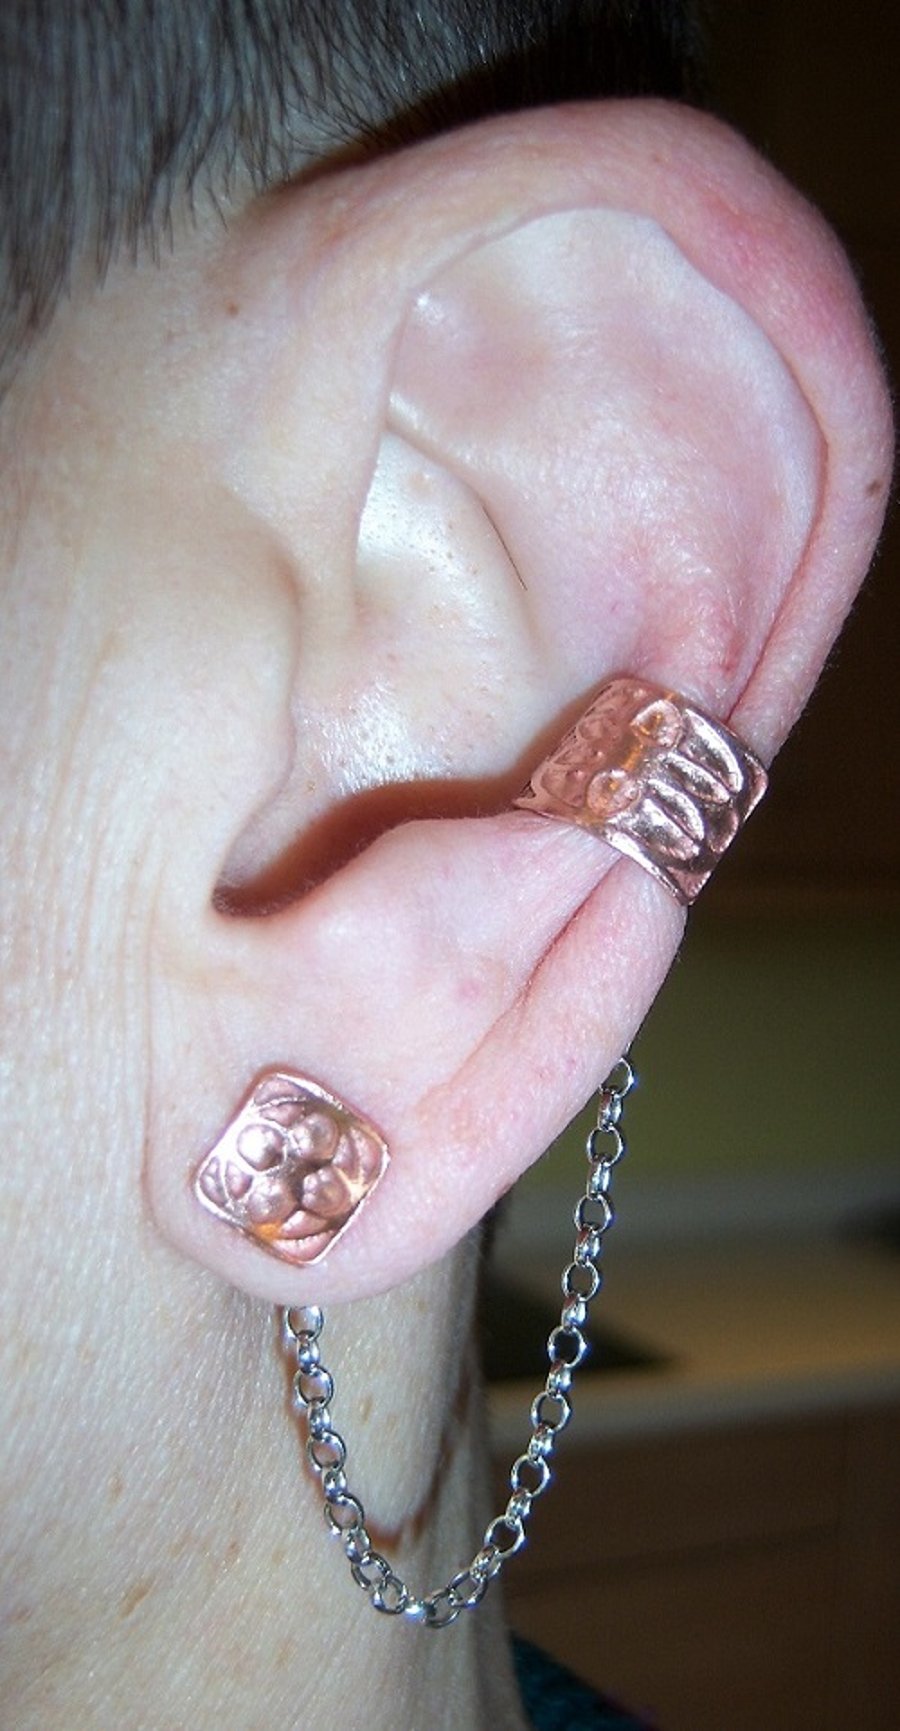 Ear cuff in etched copper with chain attached stud